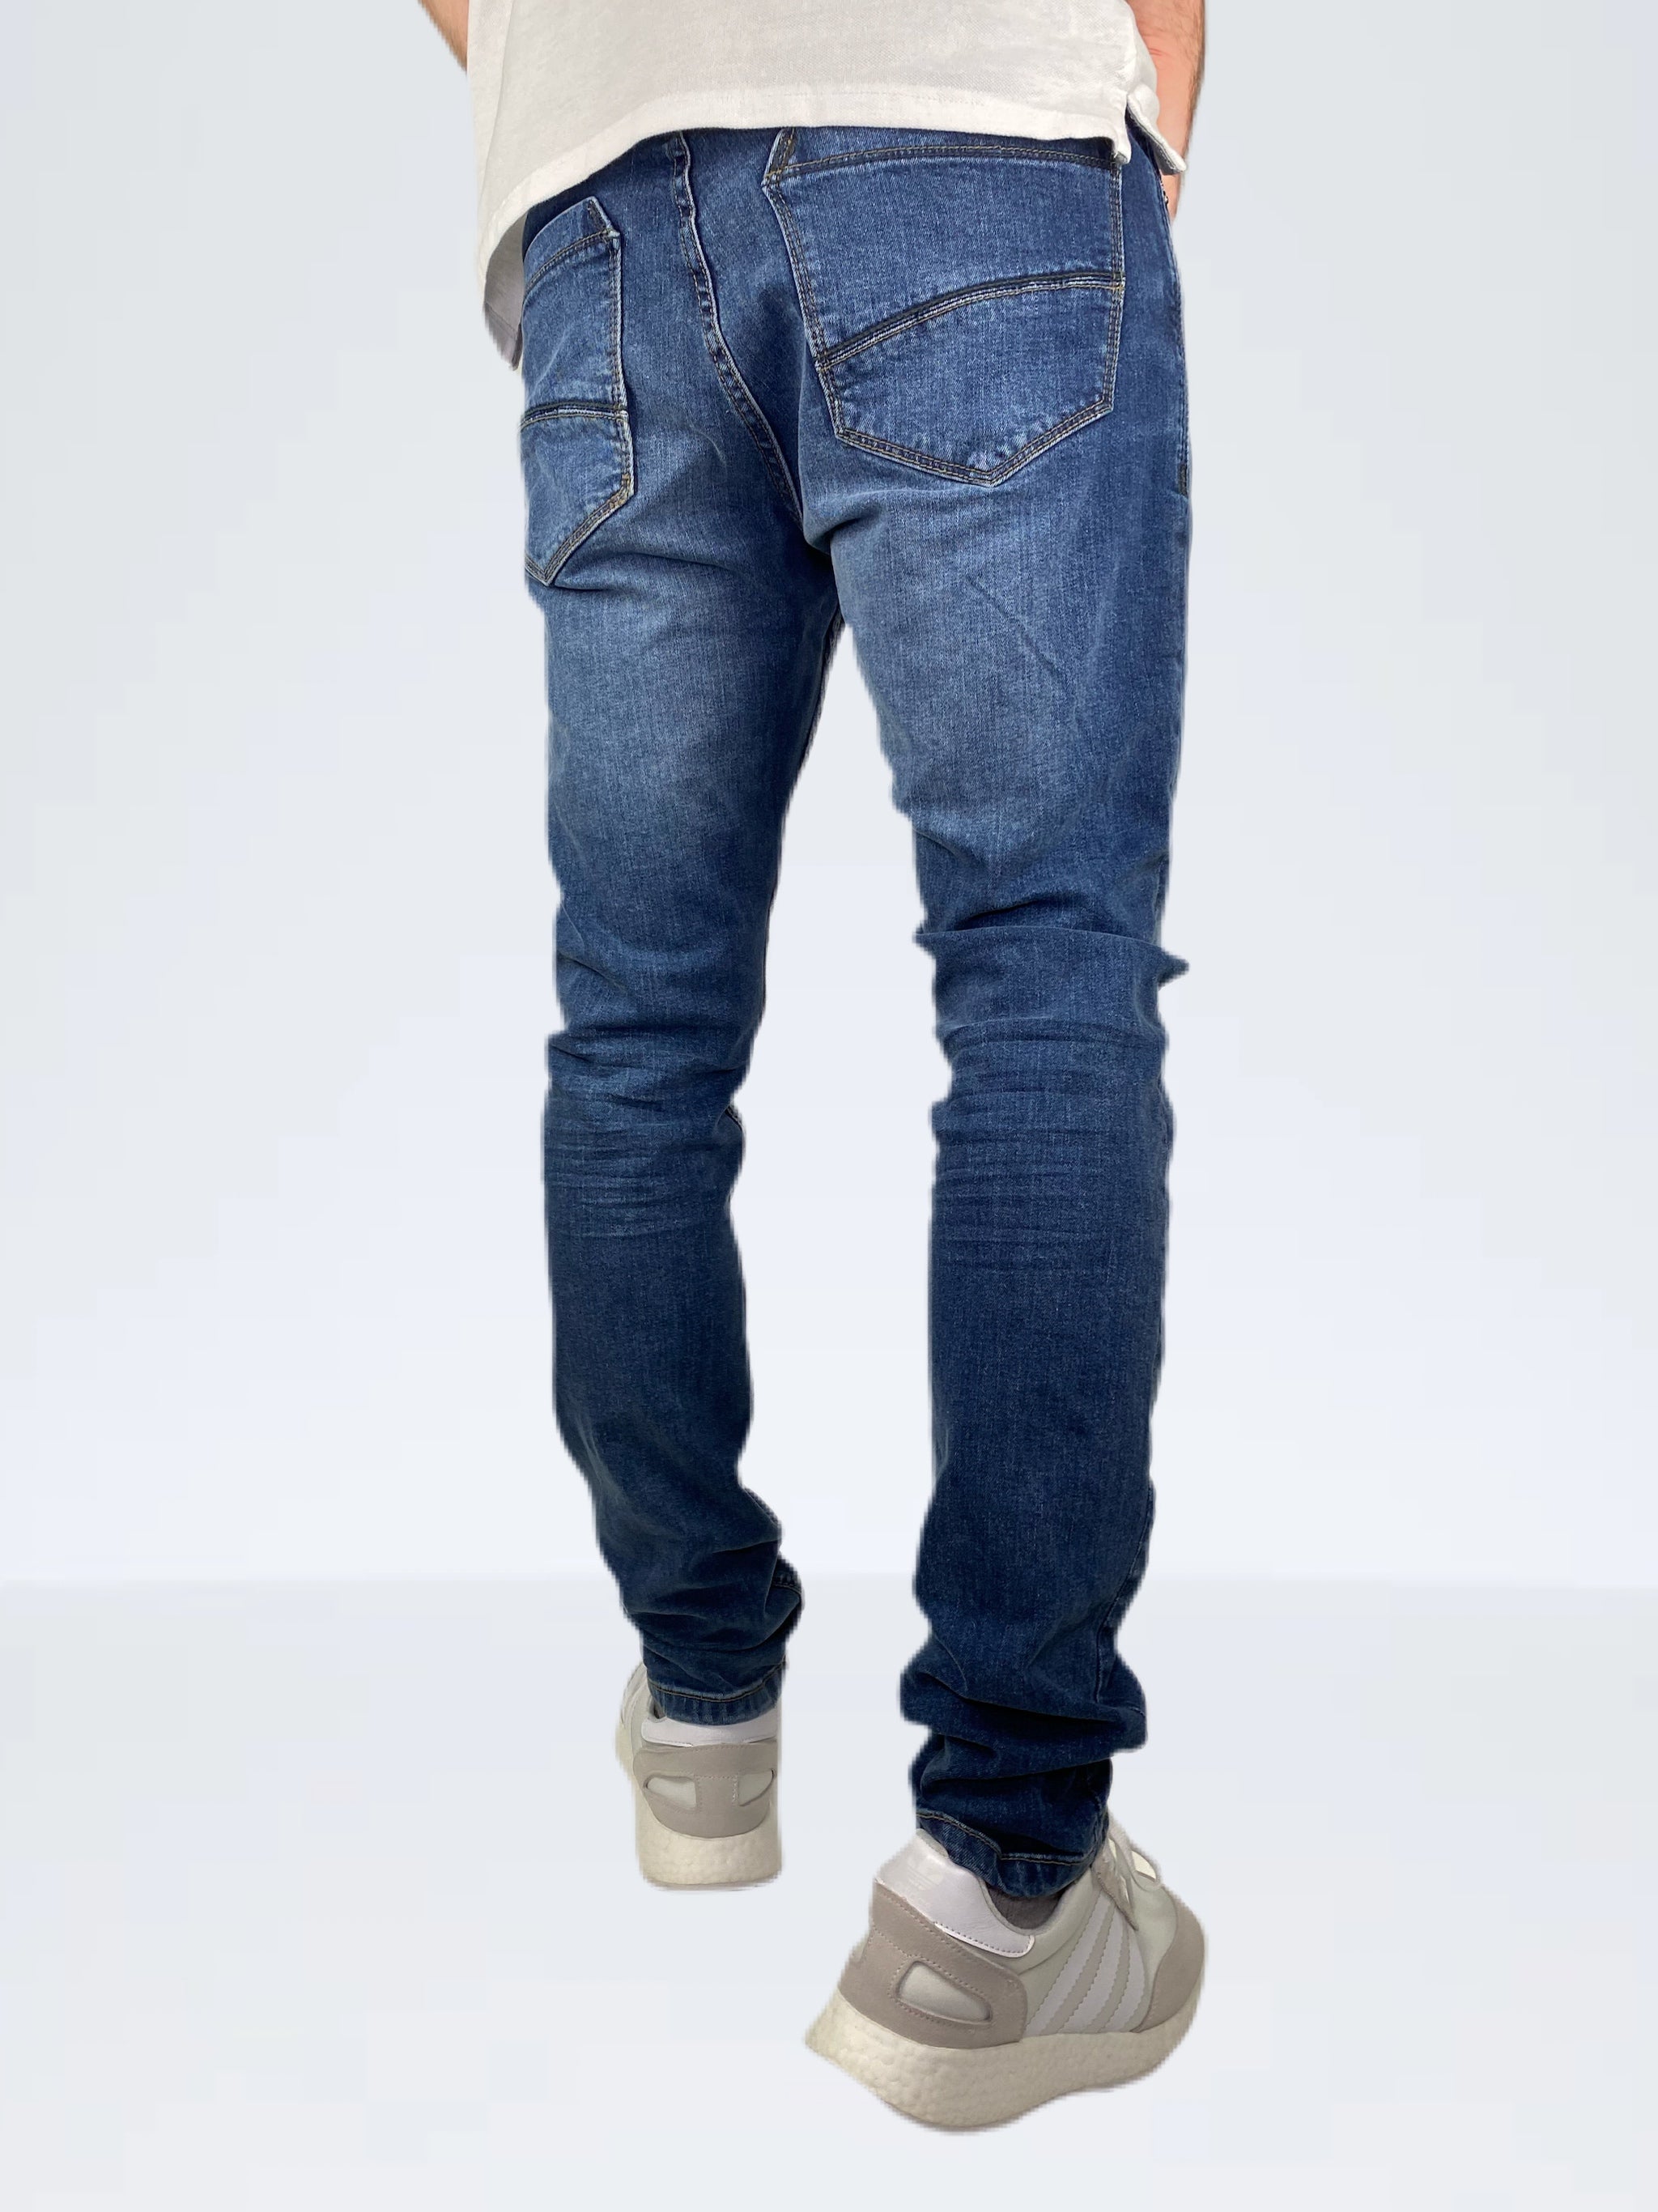 Pad&Pen | DENIS - Tapered Fit | D212 usedwashed